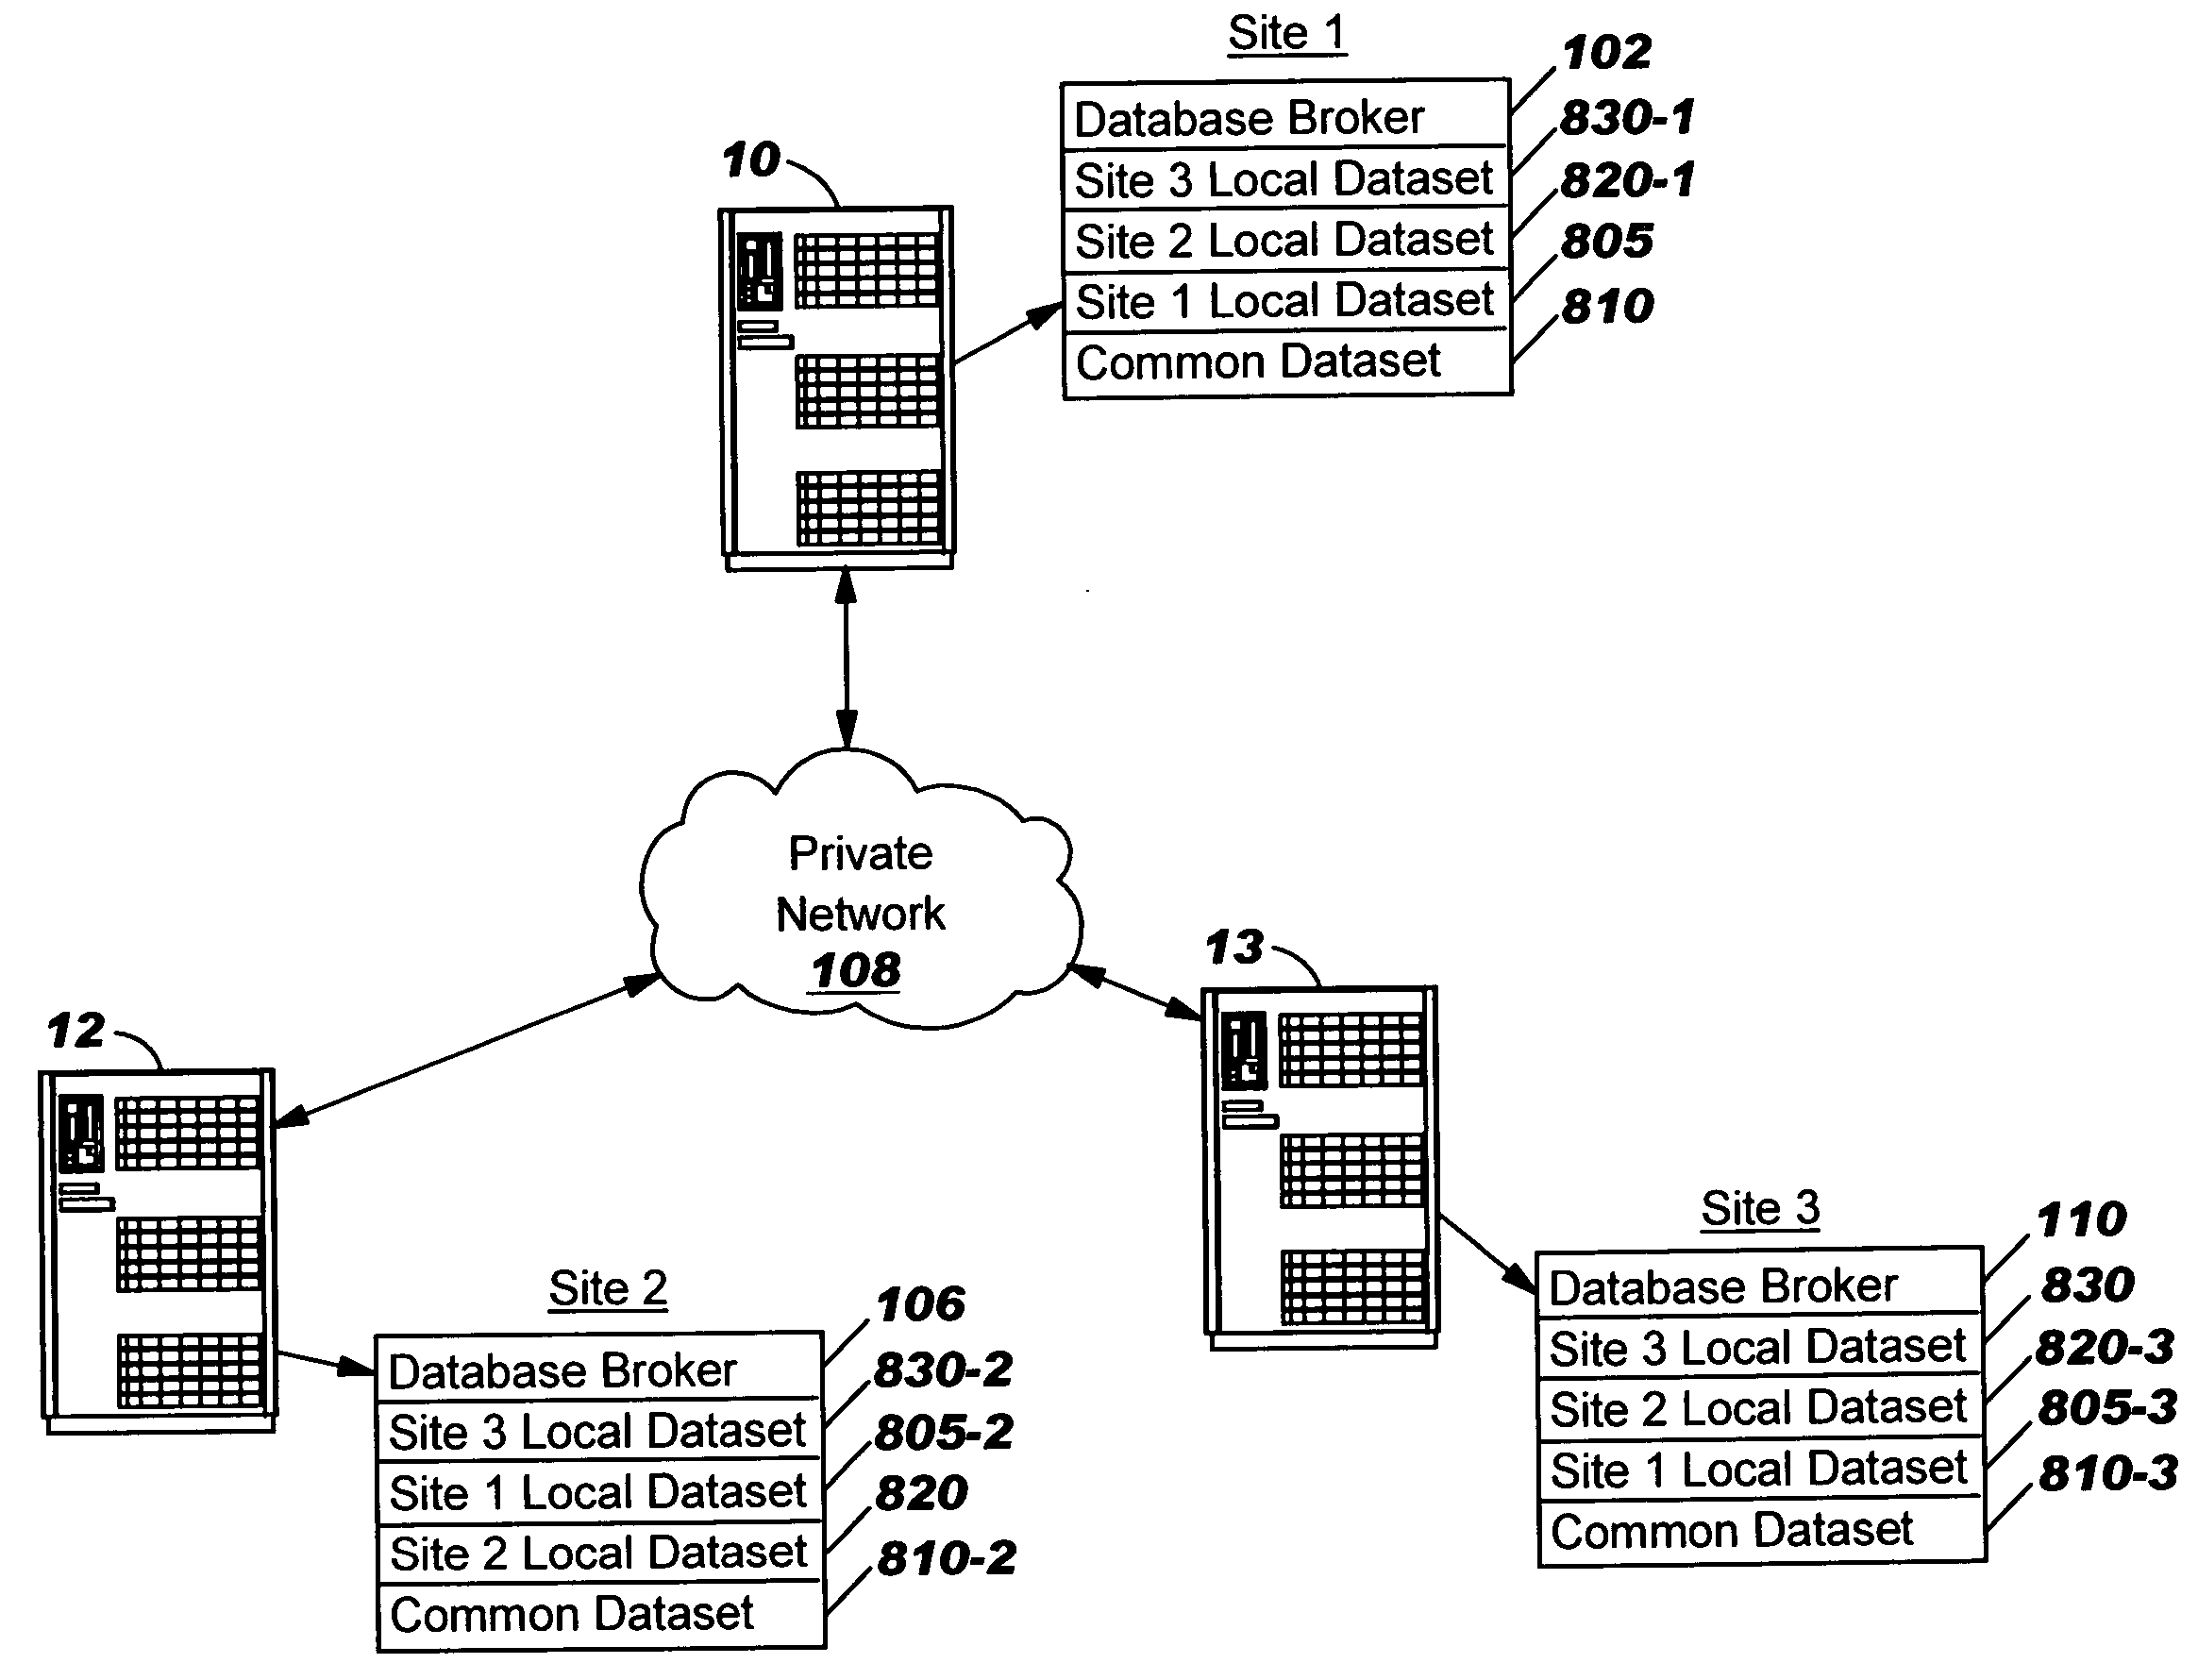 Data synchronization between distributed computers